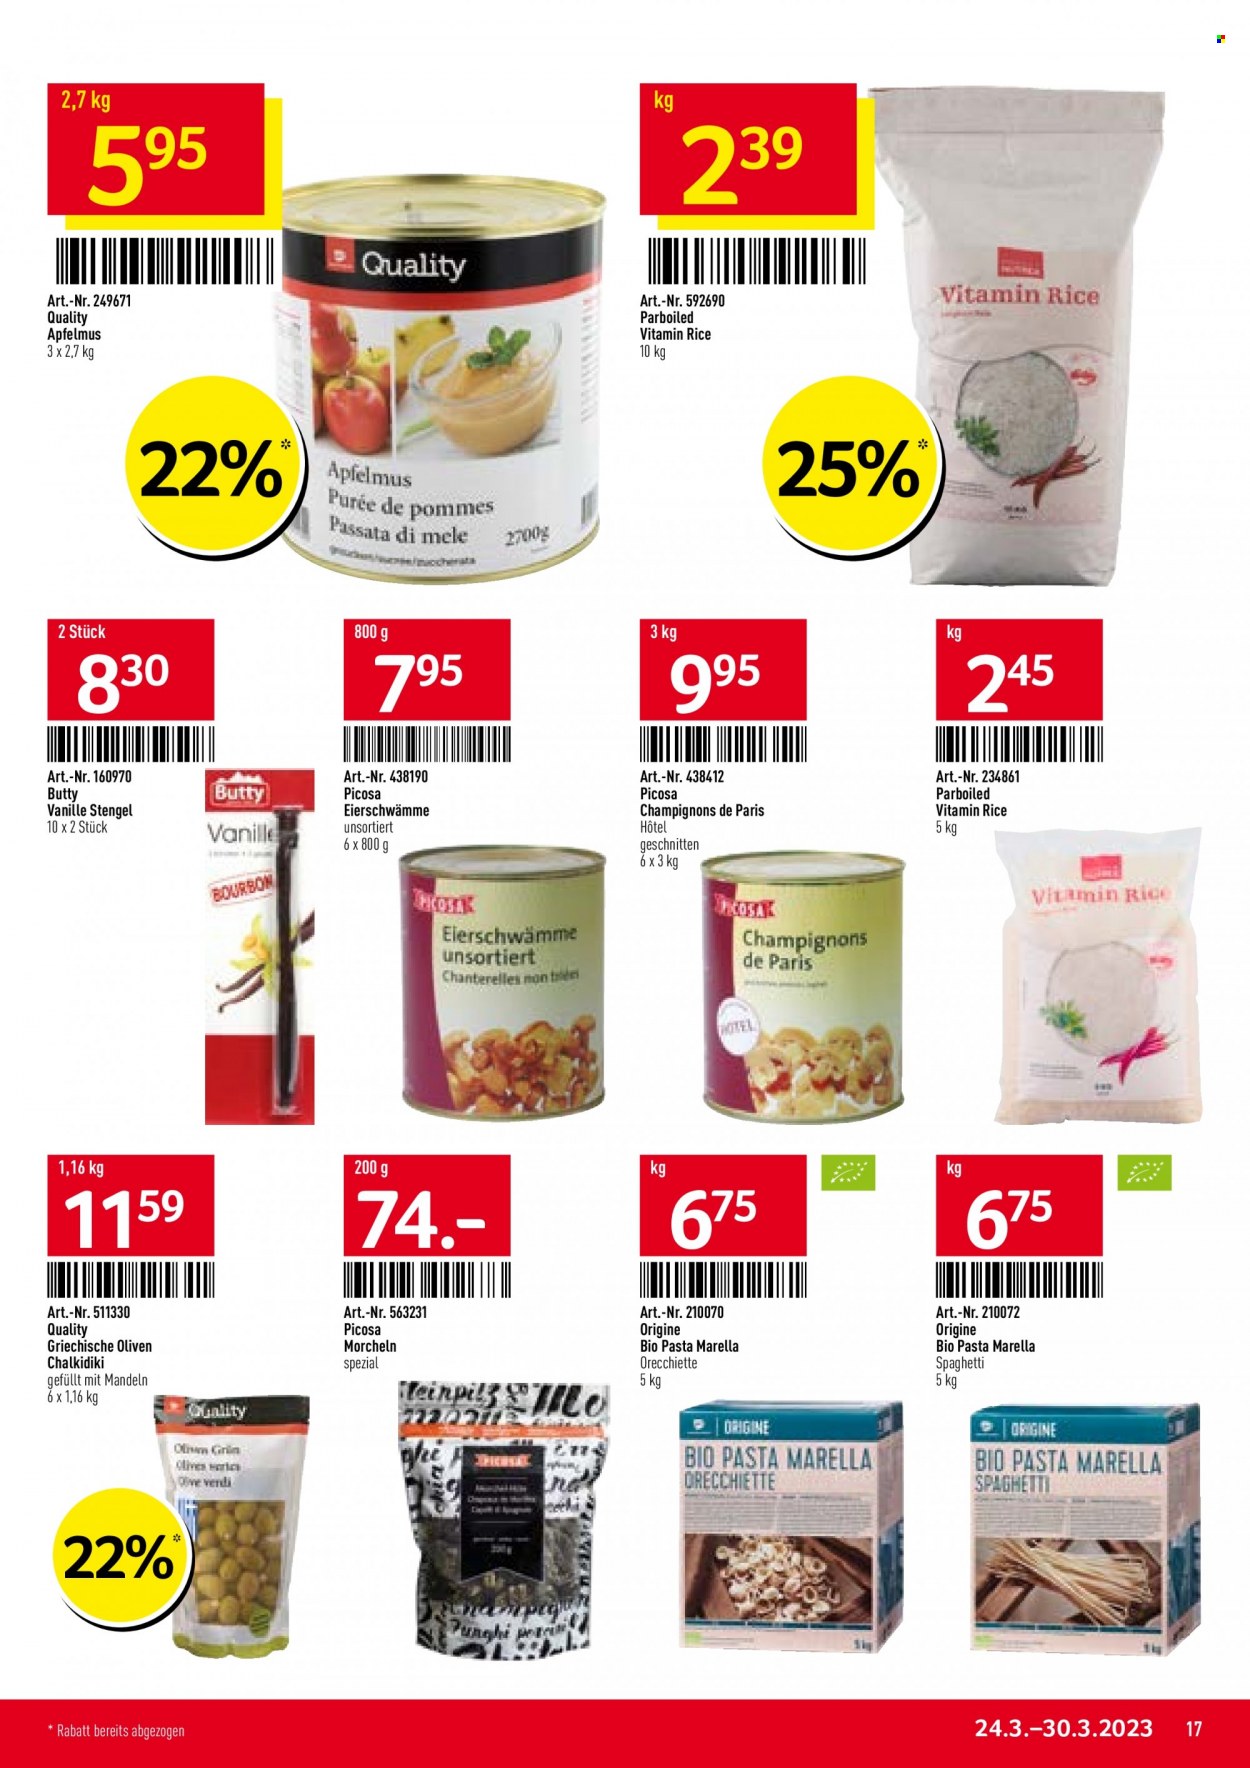 Catalogue TransGourmet - 24.3.2023 - 30.3.2023. Page 17.